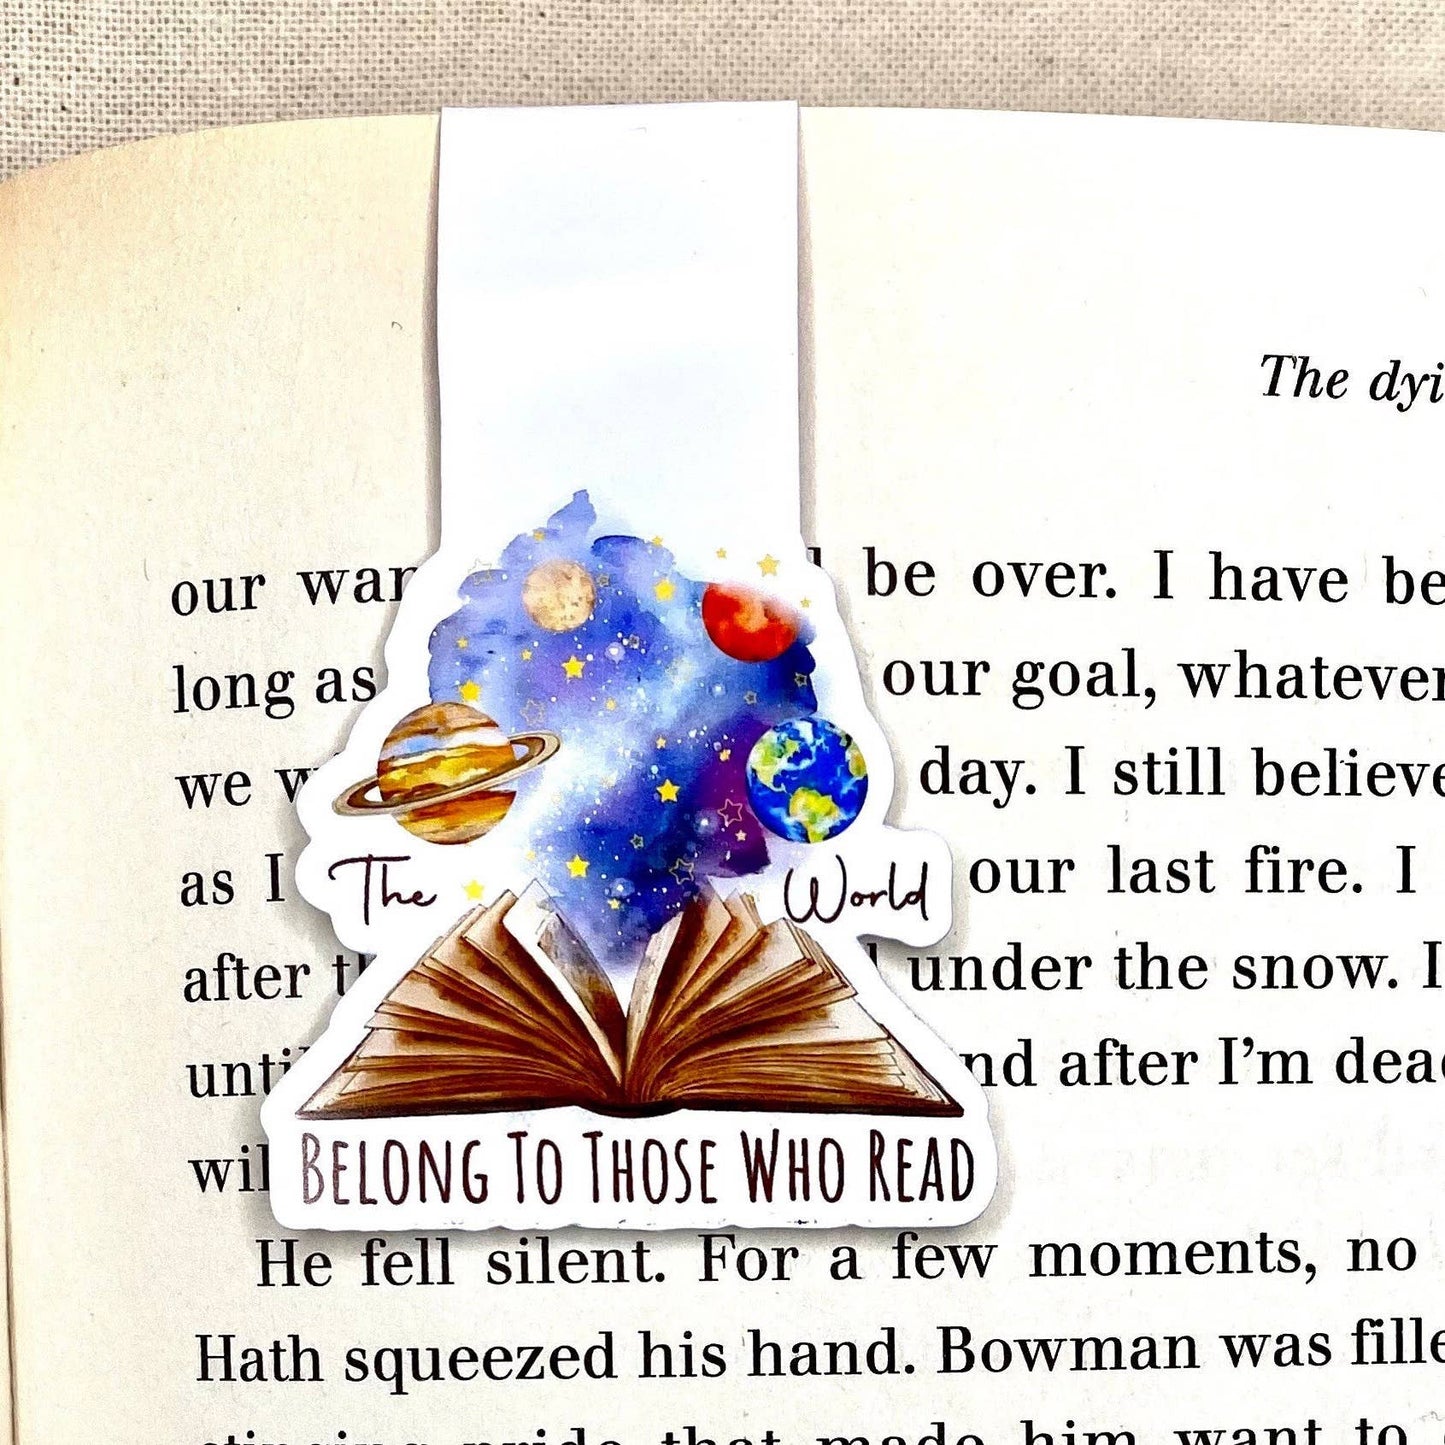 The world, magnetic bookmark, perfect gift for readers